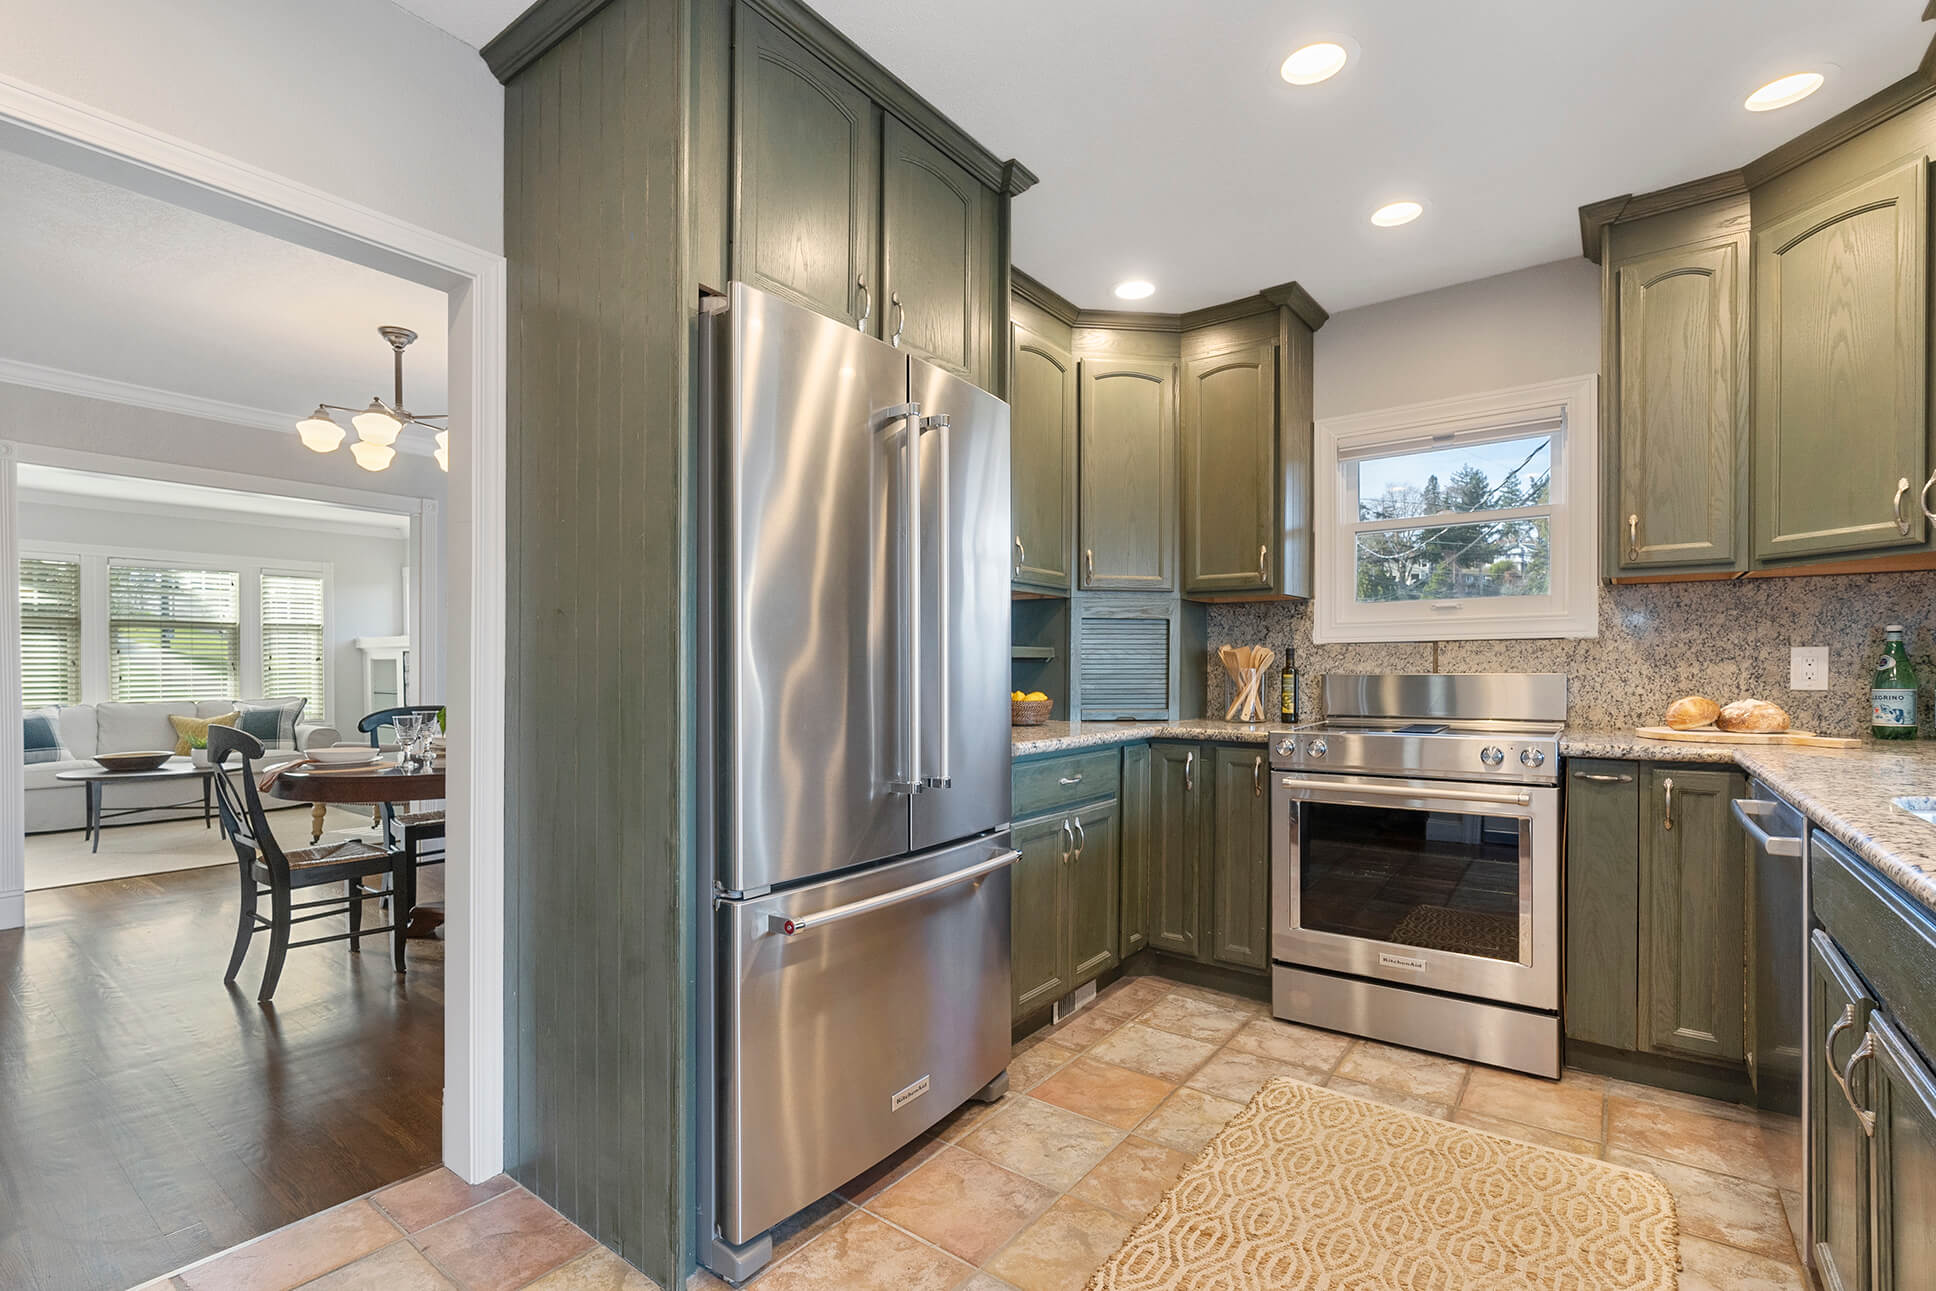 Updated kitchen with granite counters and stainless appliances